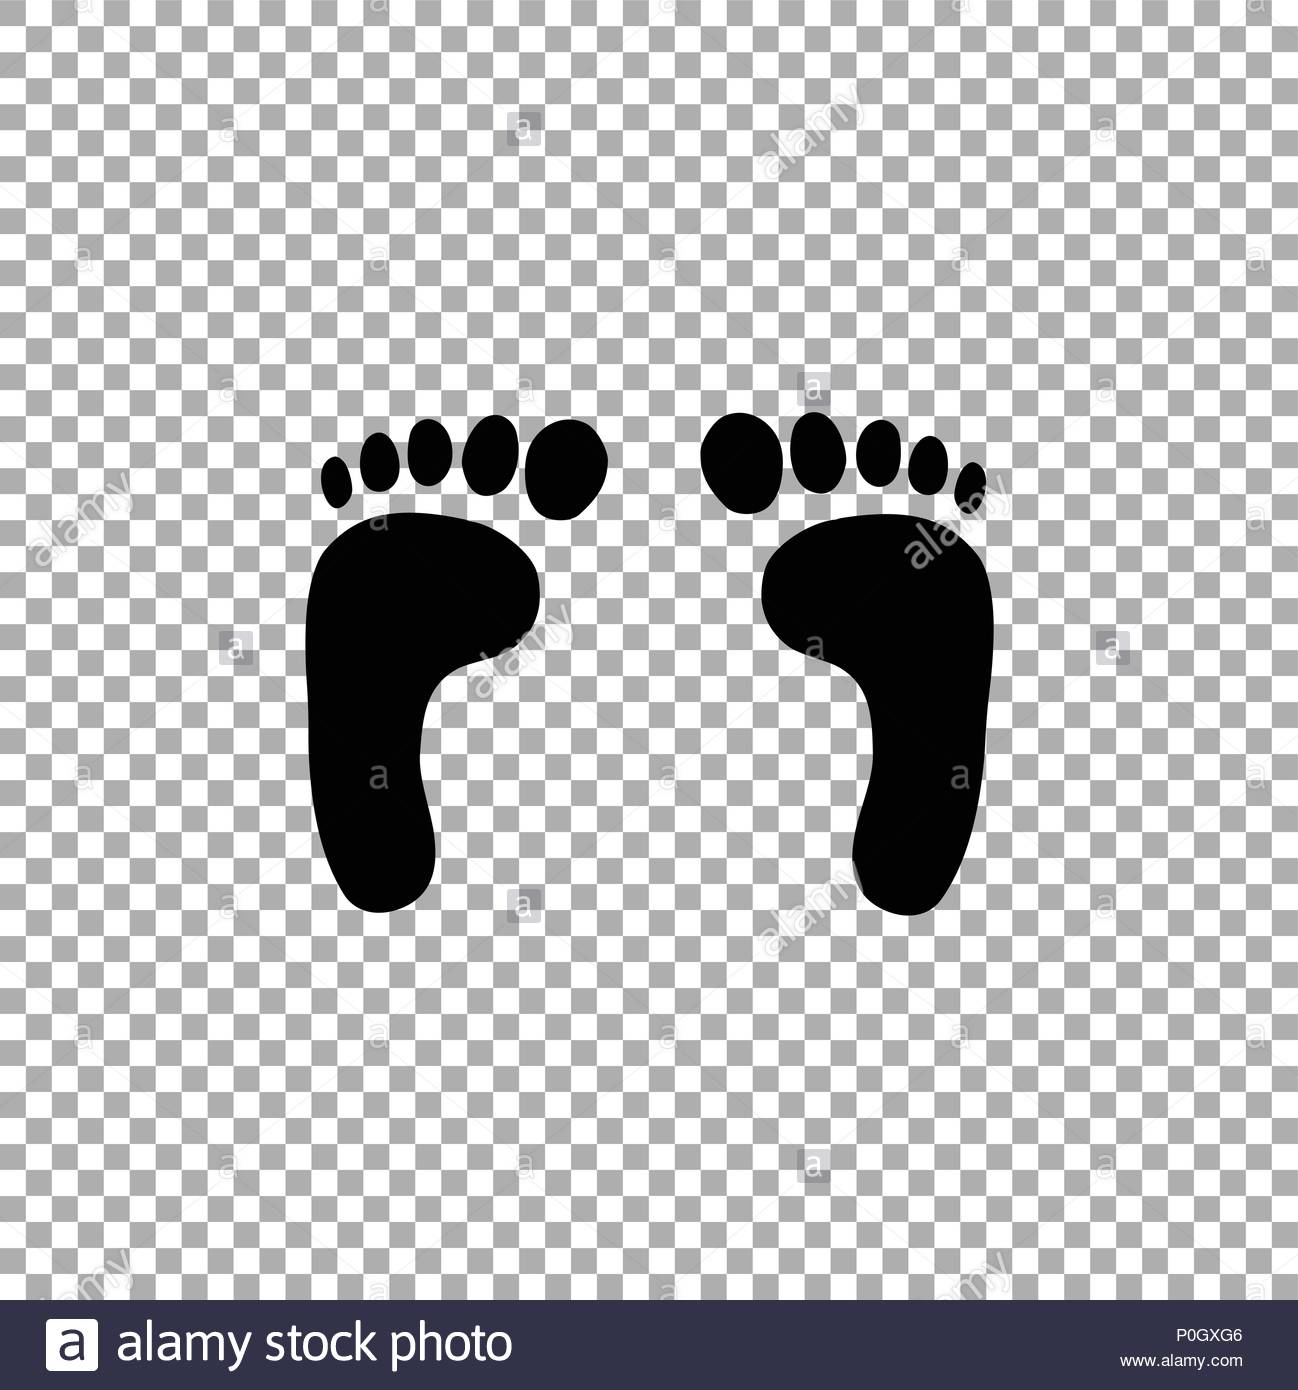 Black silhouette of human barefoot footprint isolated on